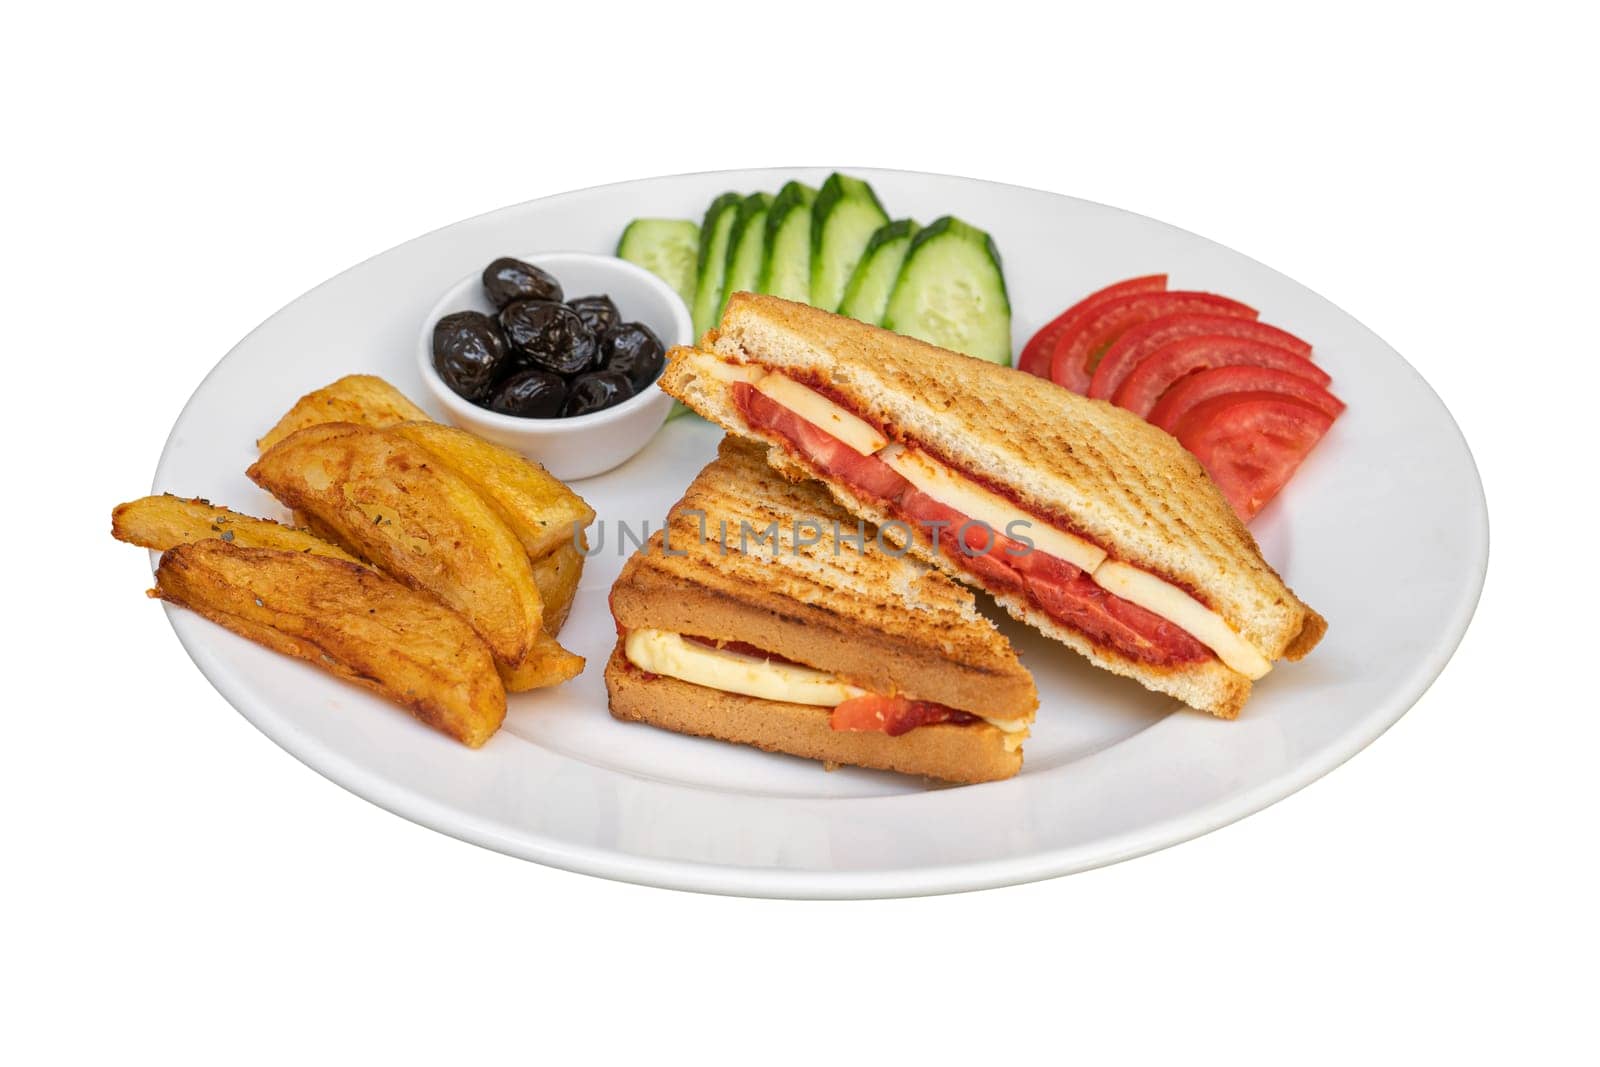 Toast with cheddar cheese, sausage and tomato with french fries and salad on white background by Sonat